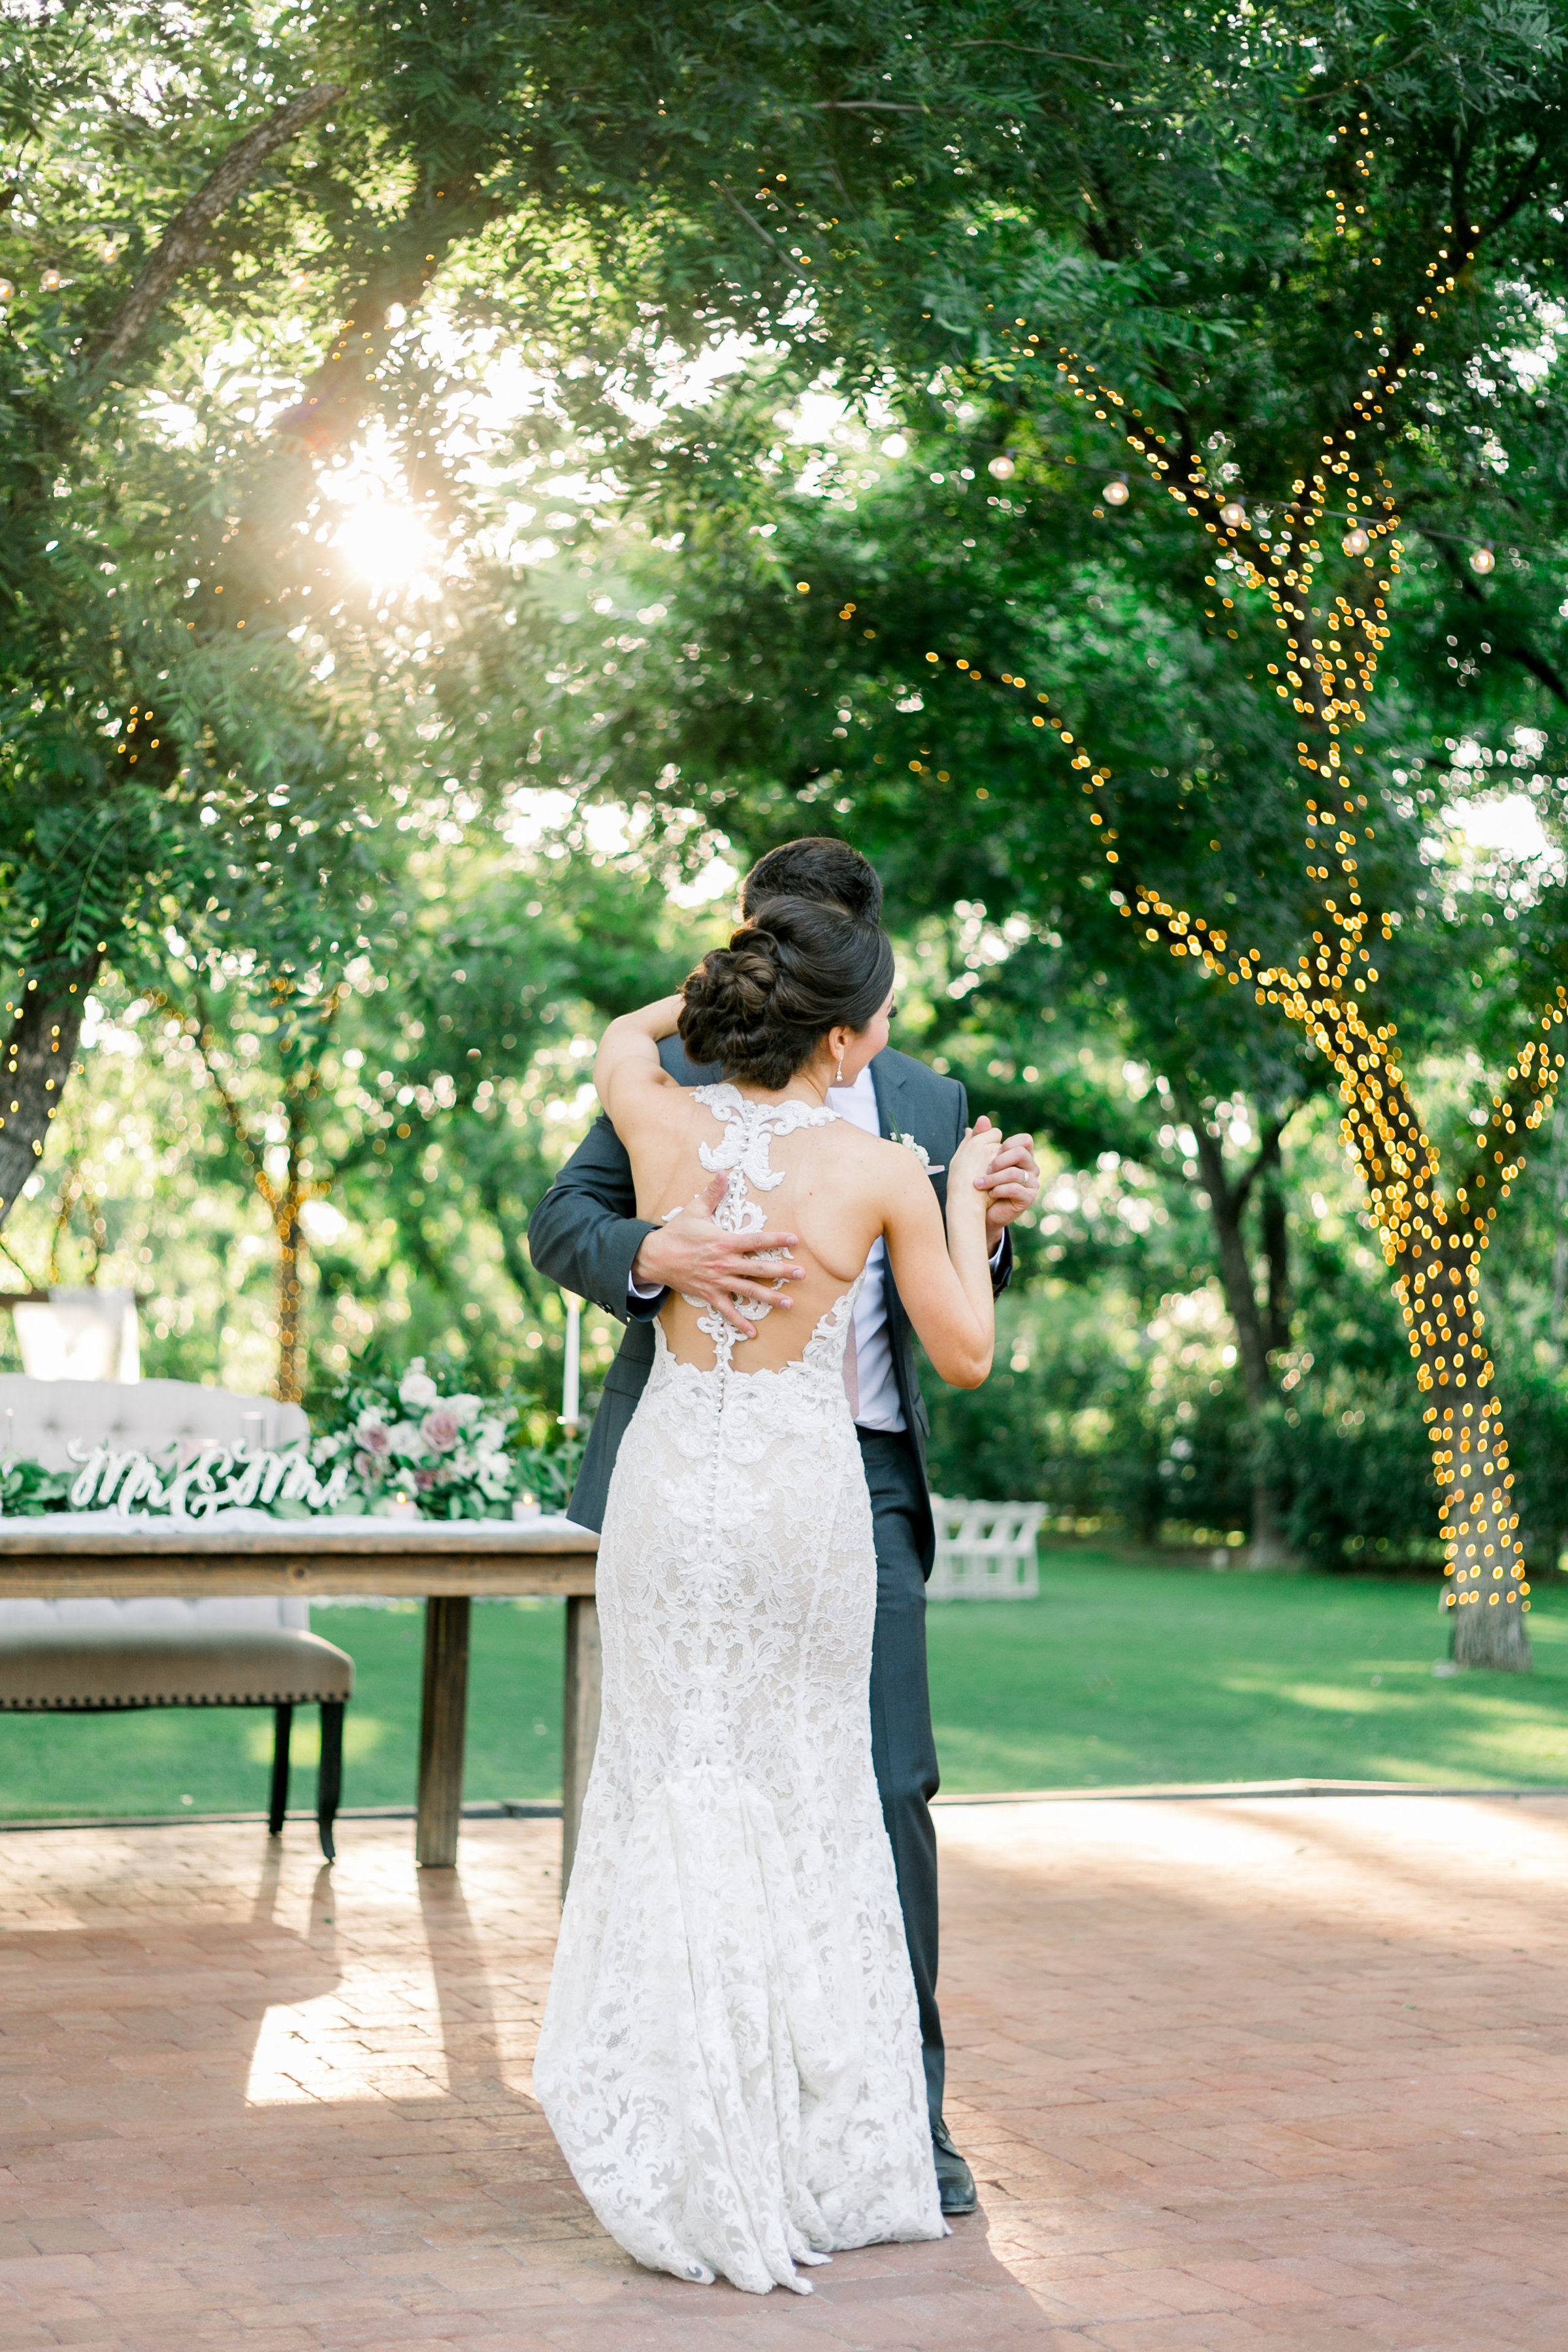 Karlie Colleen Photography - Venue At The Grove - Arizona Wedding - Maggie & Grant -100